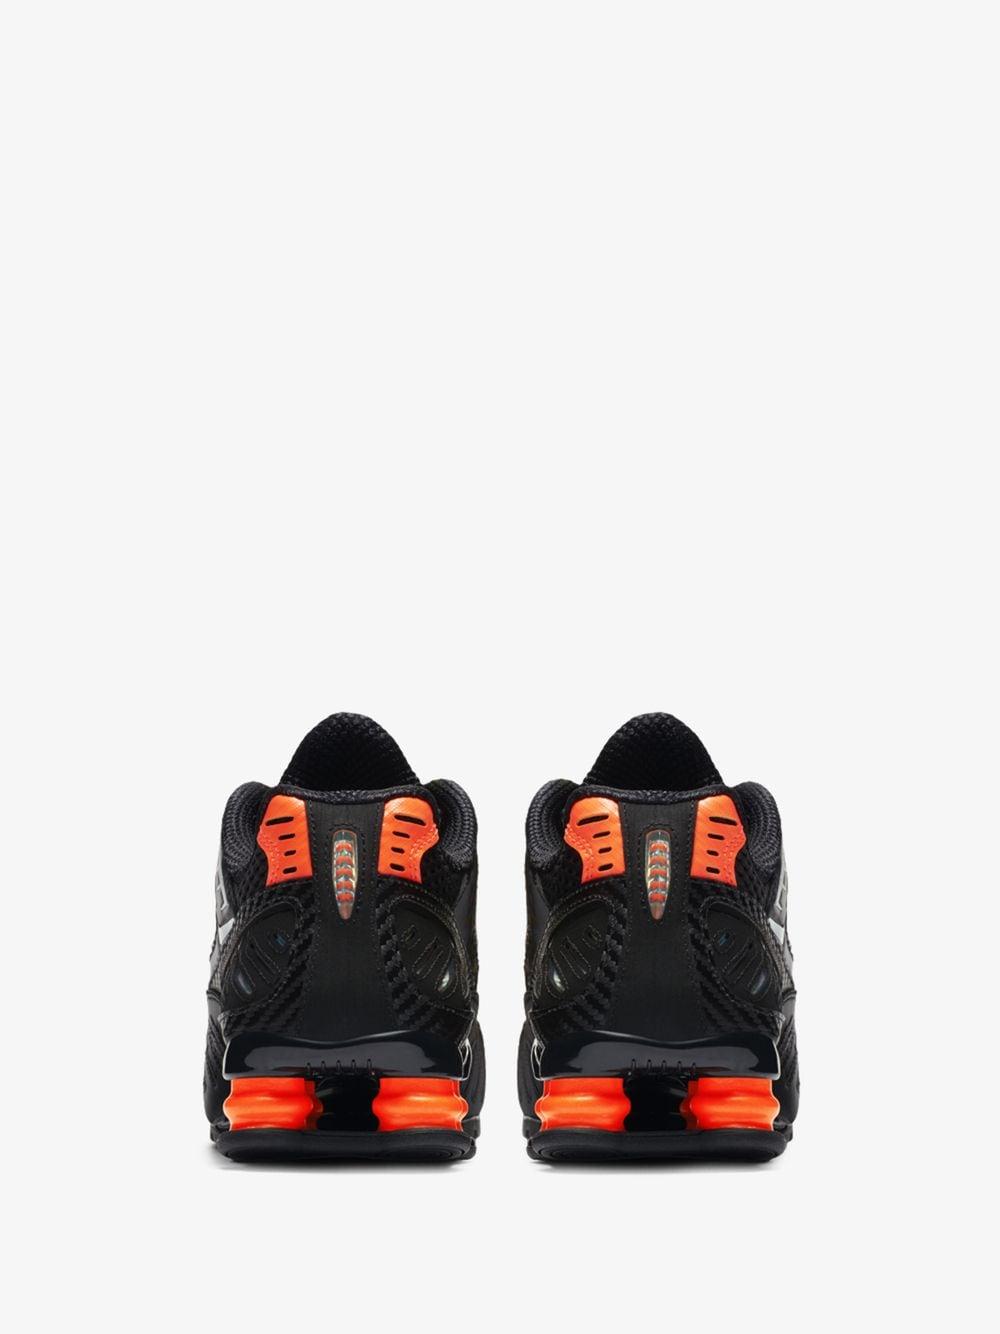 Nike Black And Orange Shox Enigma Sneakers for Men | Lyst